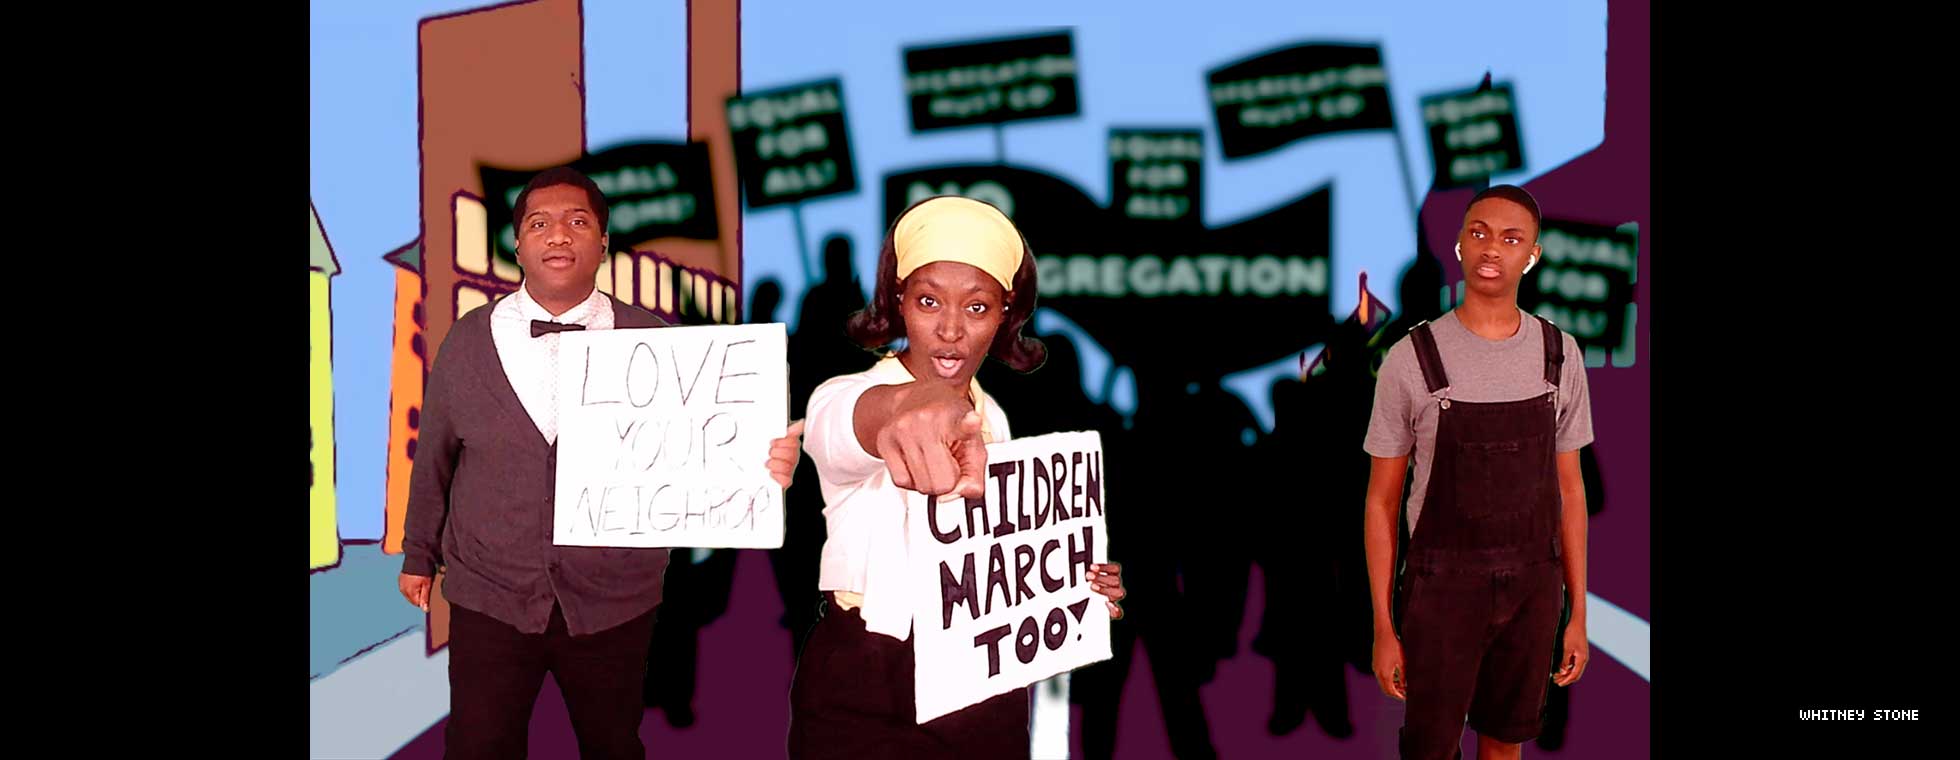 A boy watches two people holding protest signs that read “Love Your Neighbor” and “Children March Too.” 